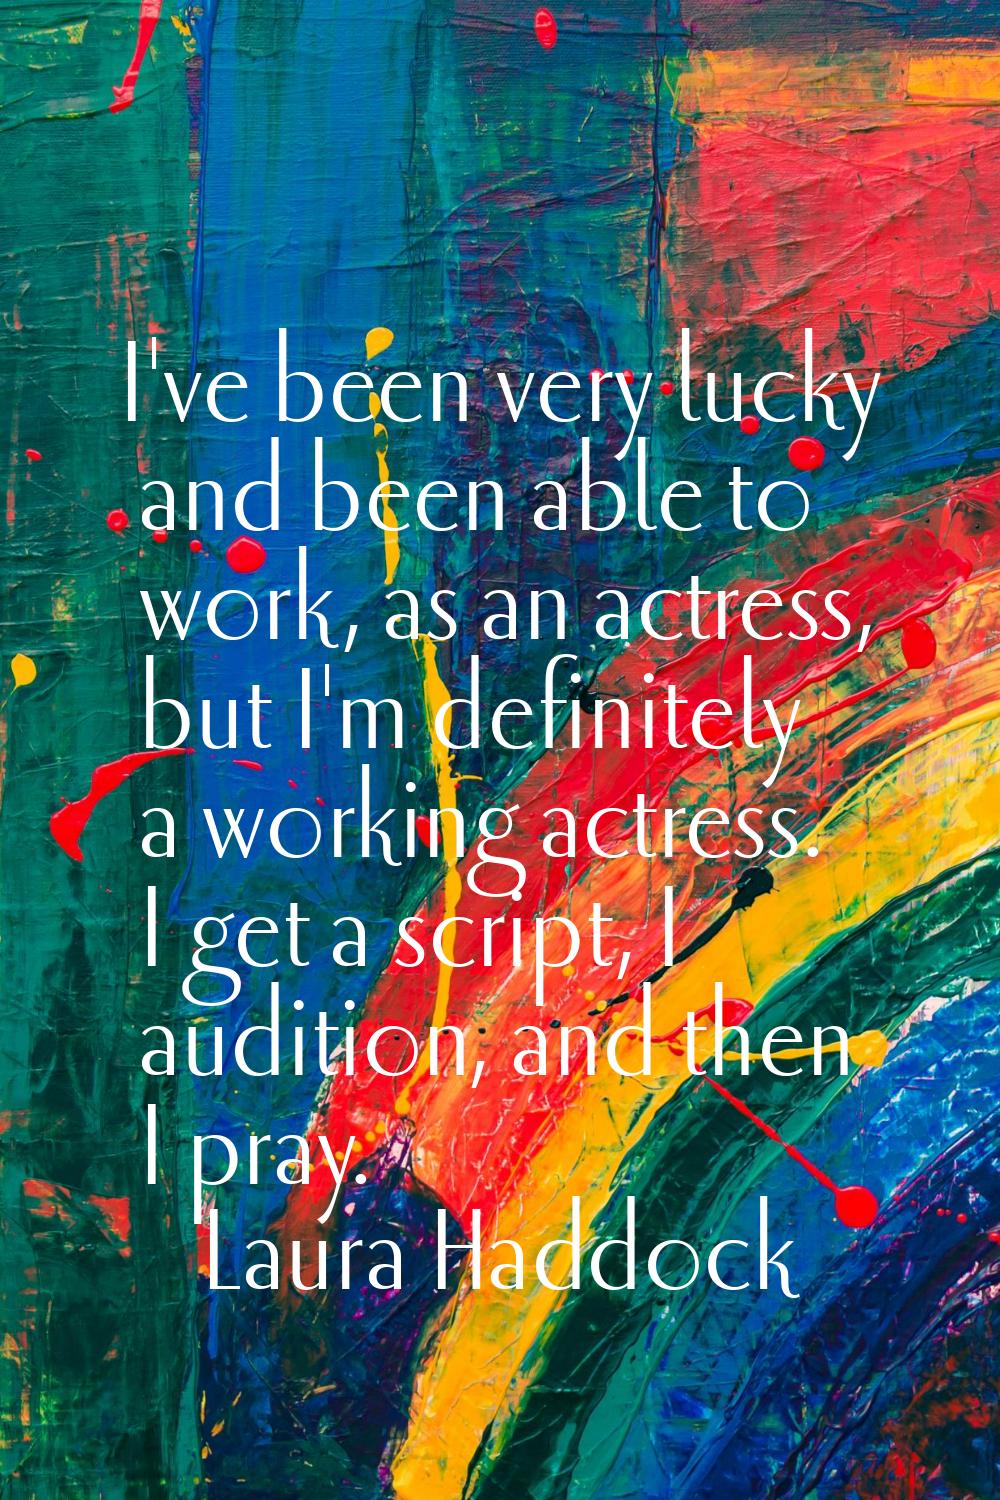 I've been very lucky and been able to work, as an actress, but I'm definitely a working actress. I 